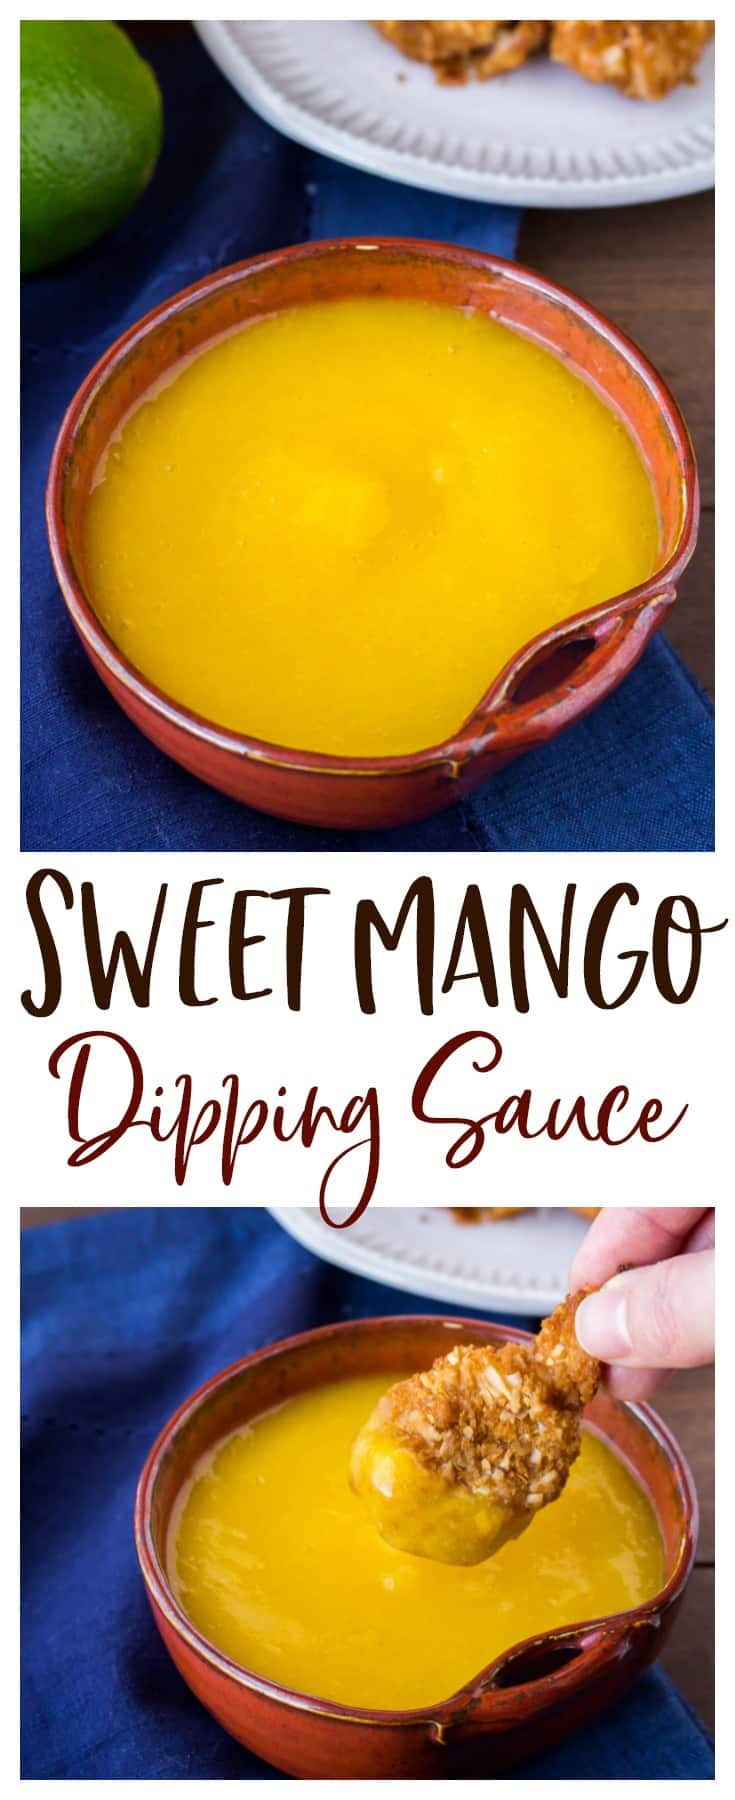 Sweet Mango Dipping Sauce - Delicious Little Bites